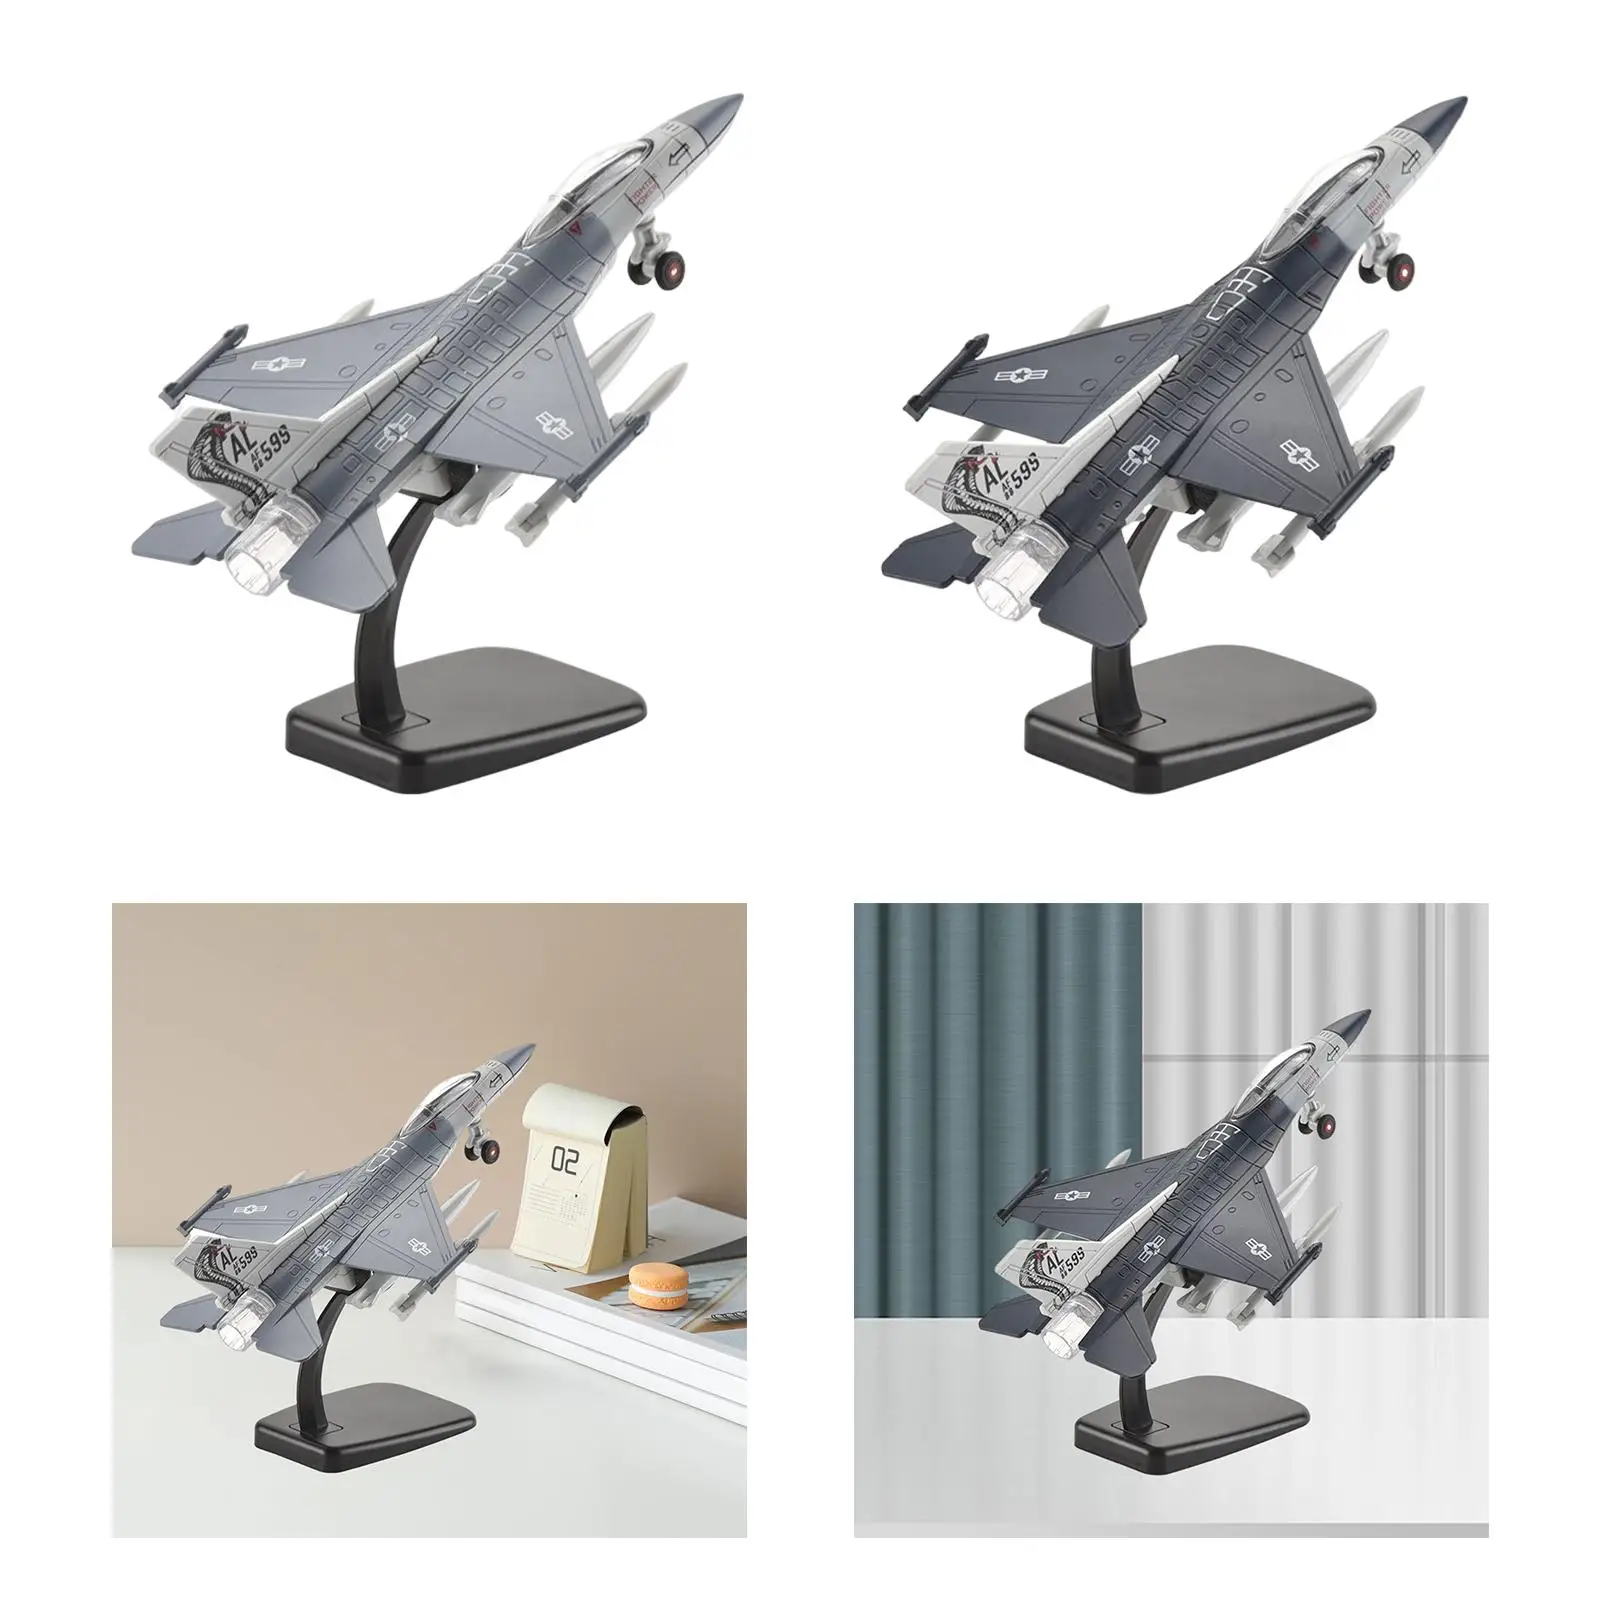 

1/72 F16 Soufa Fighter Model Diecast Aircraft Kids Toy with Display Base Adults Gift Gift Airplane Model for Bookshelf Office